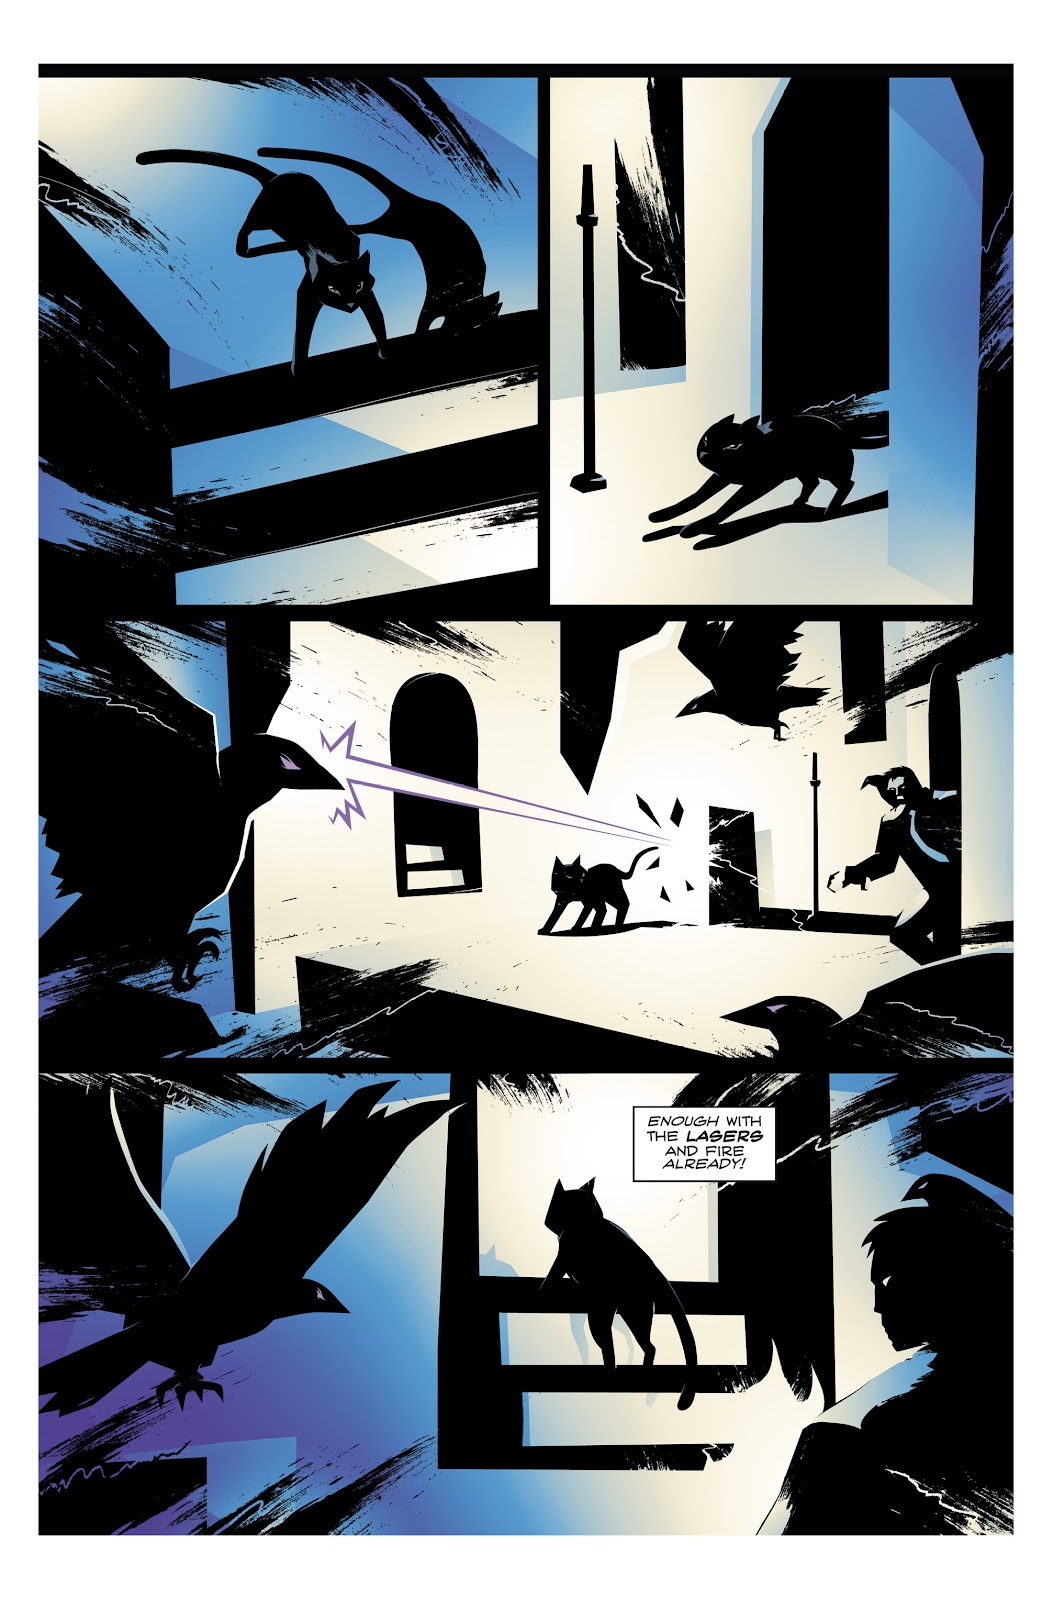 Hero Cats: Midnight Over Stellar City Vol. 2 issue 1 - Page 18